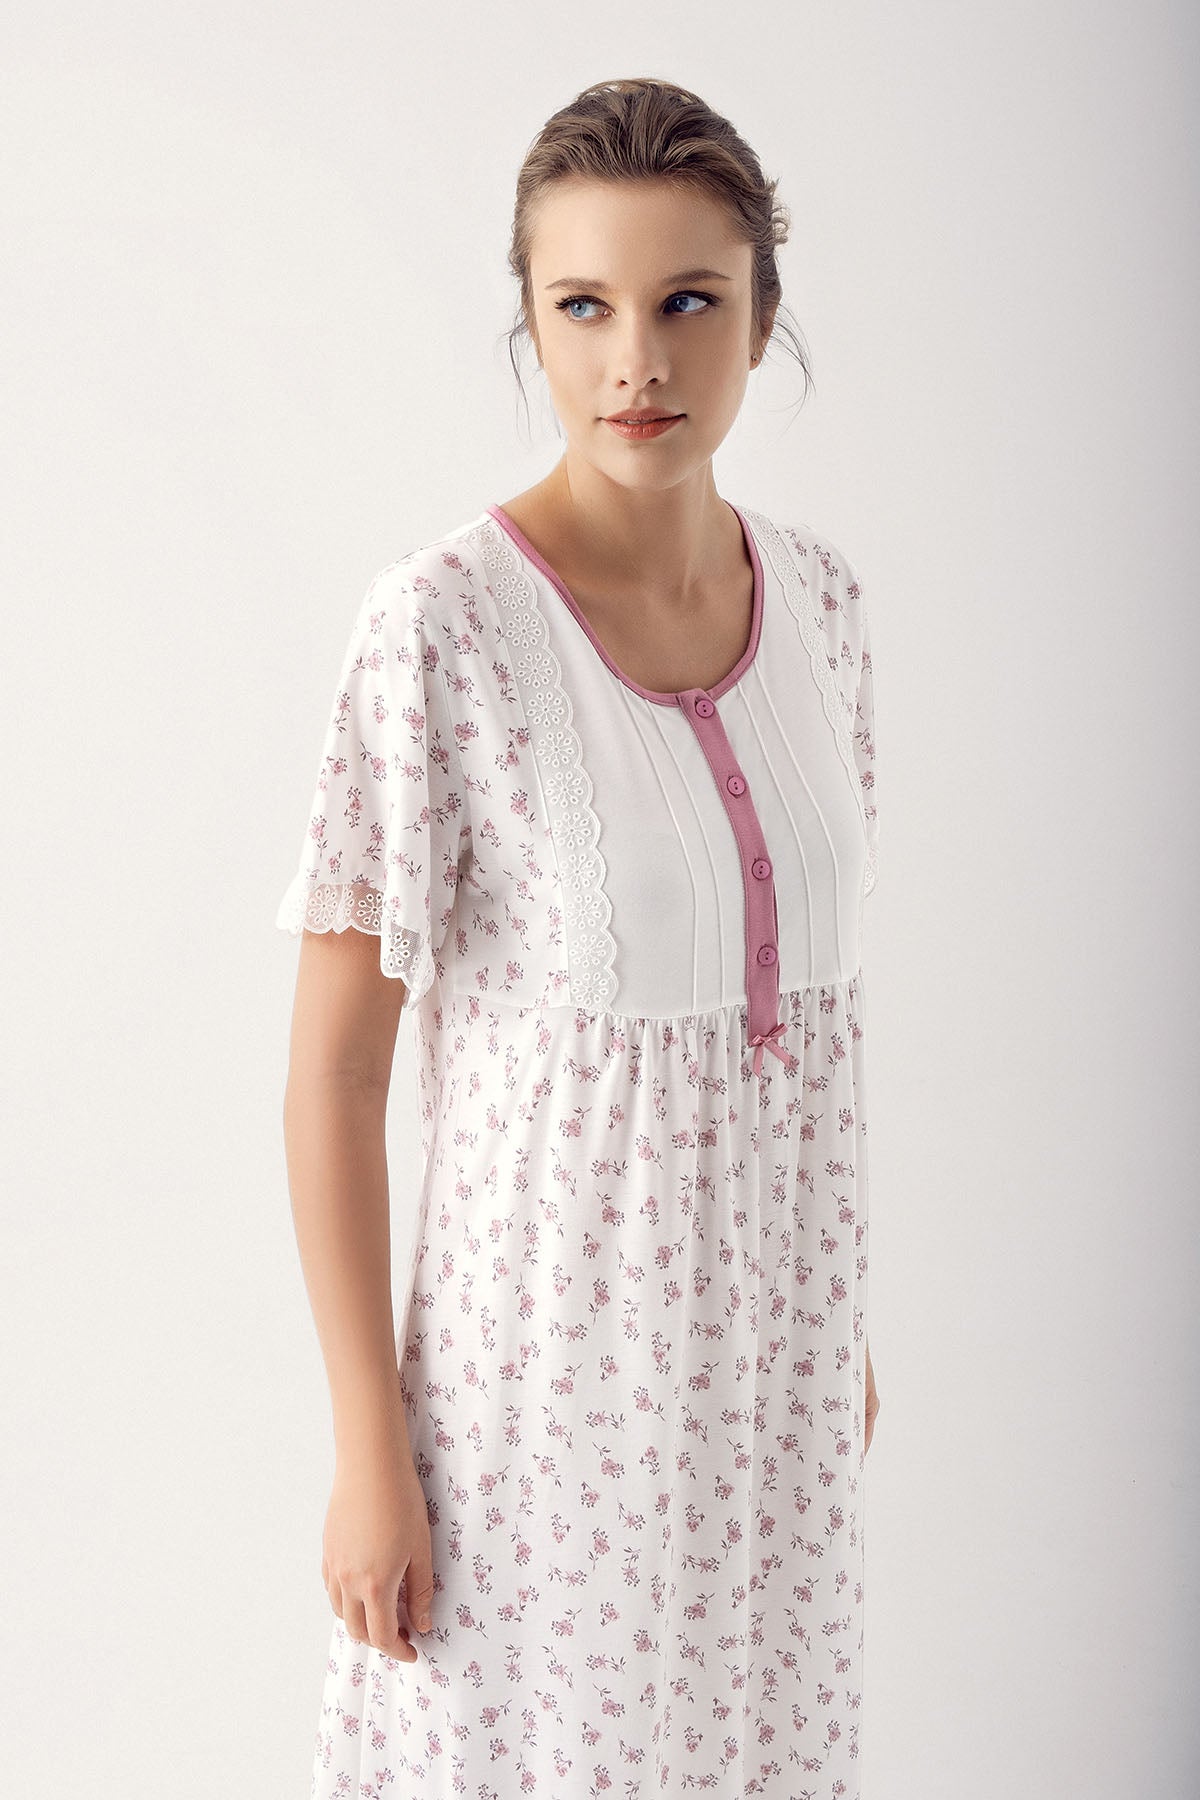 Shopymommy 14113 Flower Pattern Lace Plus Size Maternity & Nursing Nightgown Dried Rose